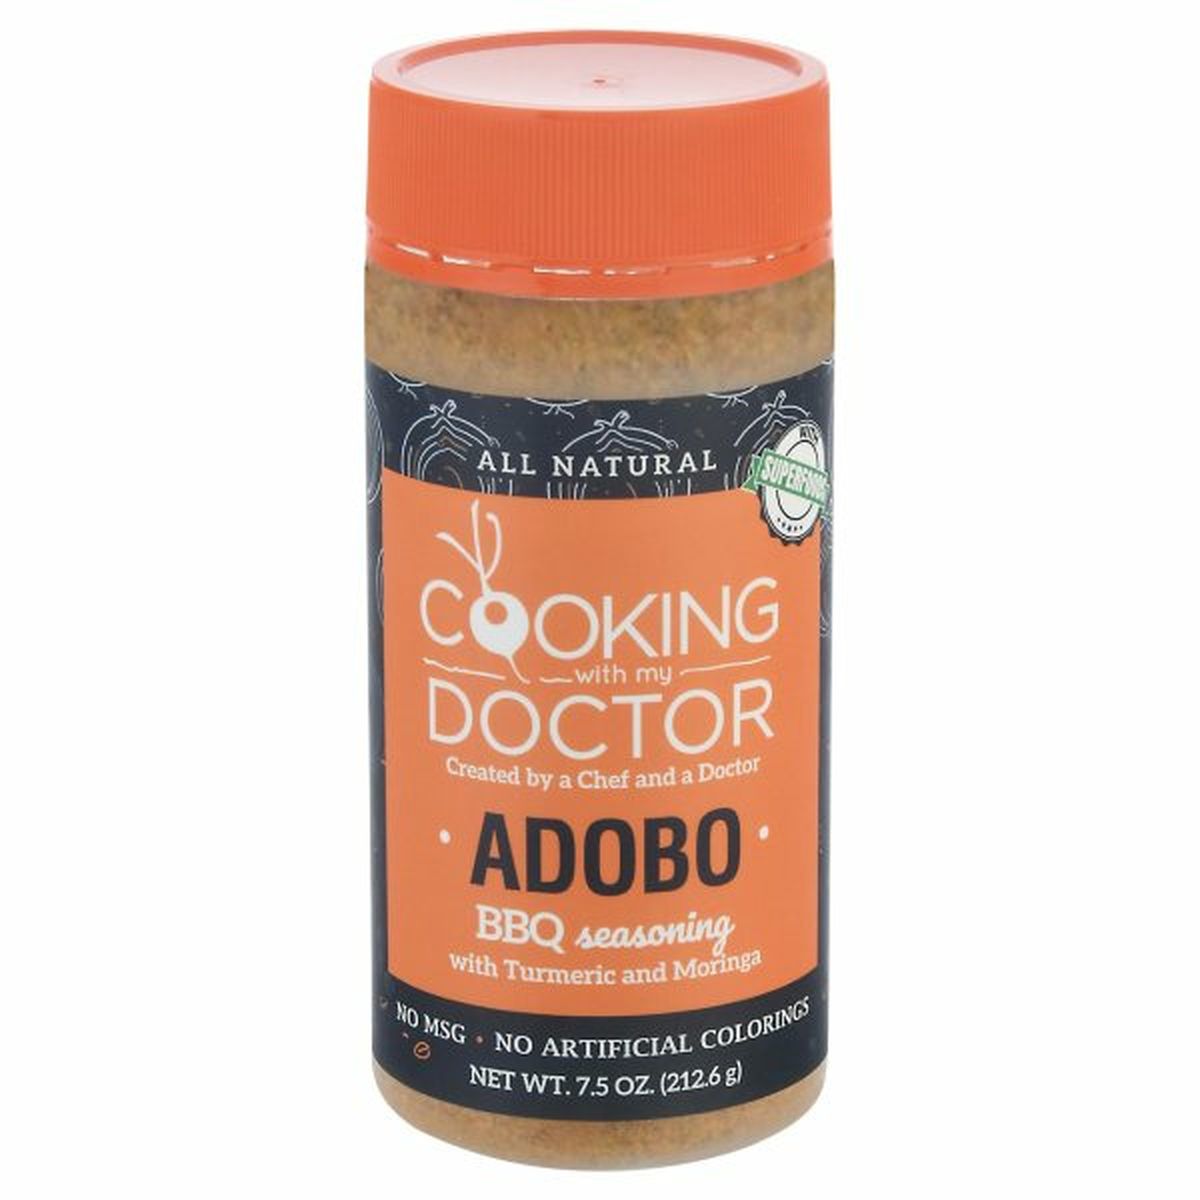 Calories in Cooking with my Doctor BBQ Seasoning, Adobo